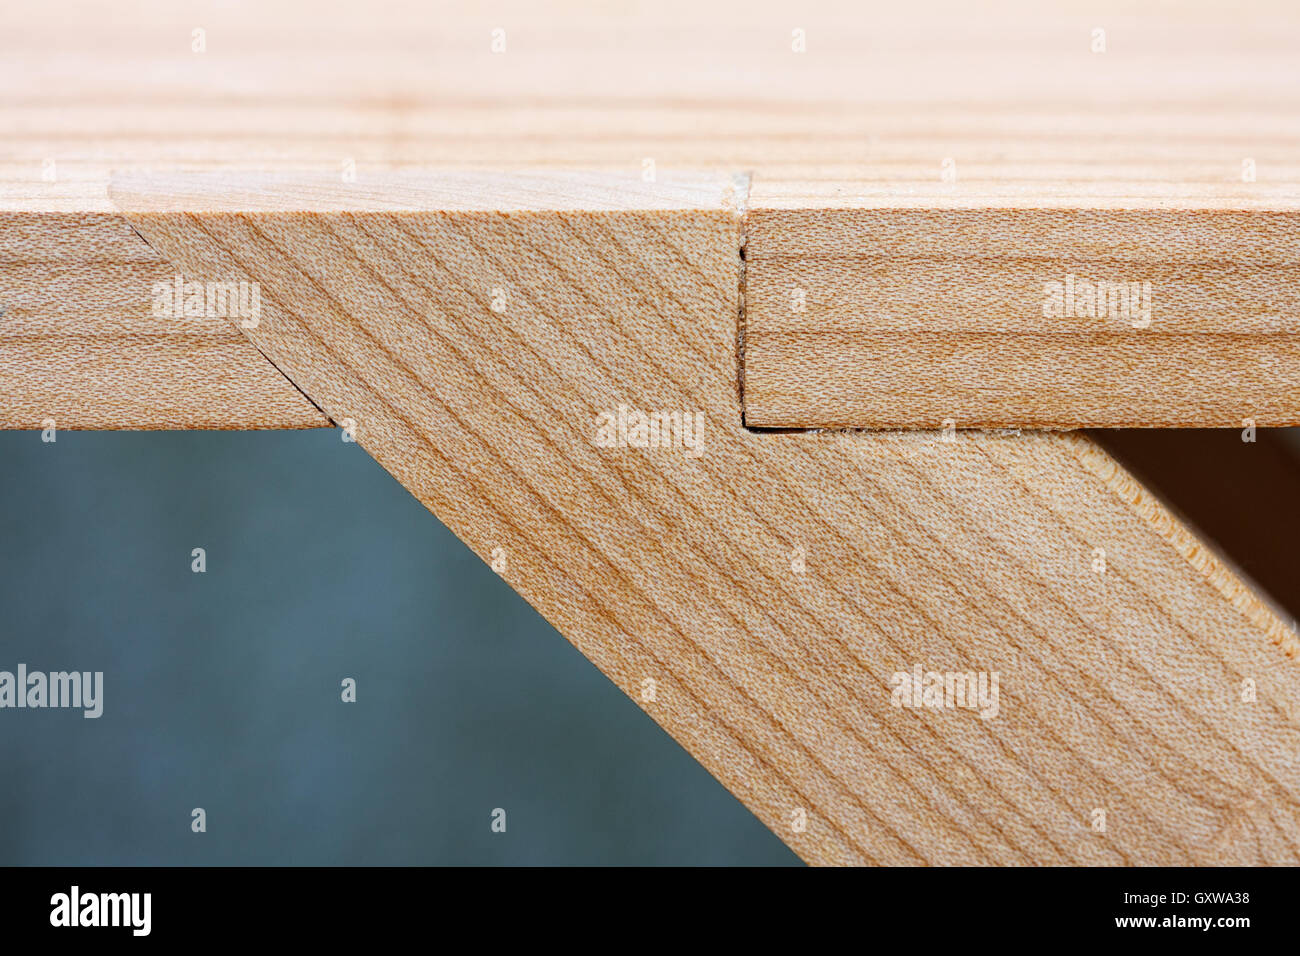 Oblique halving joint, used for joining members in an angle other than 90 degrees. Stock Photo